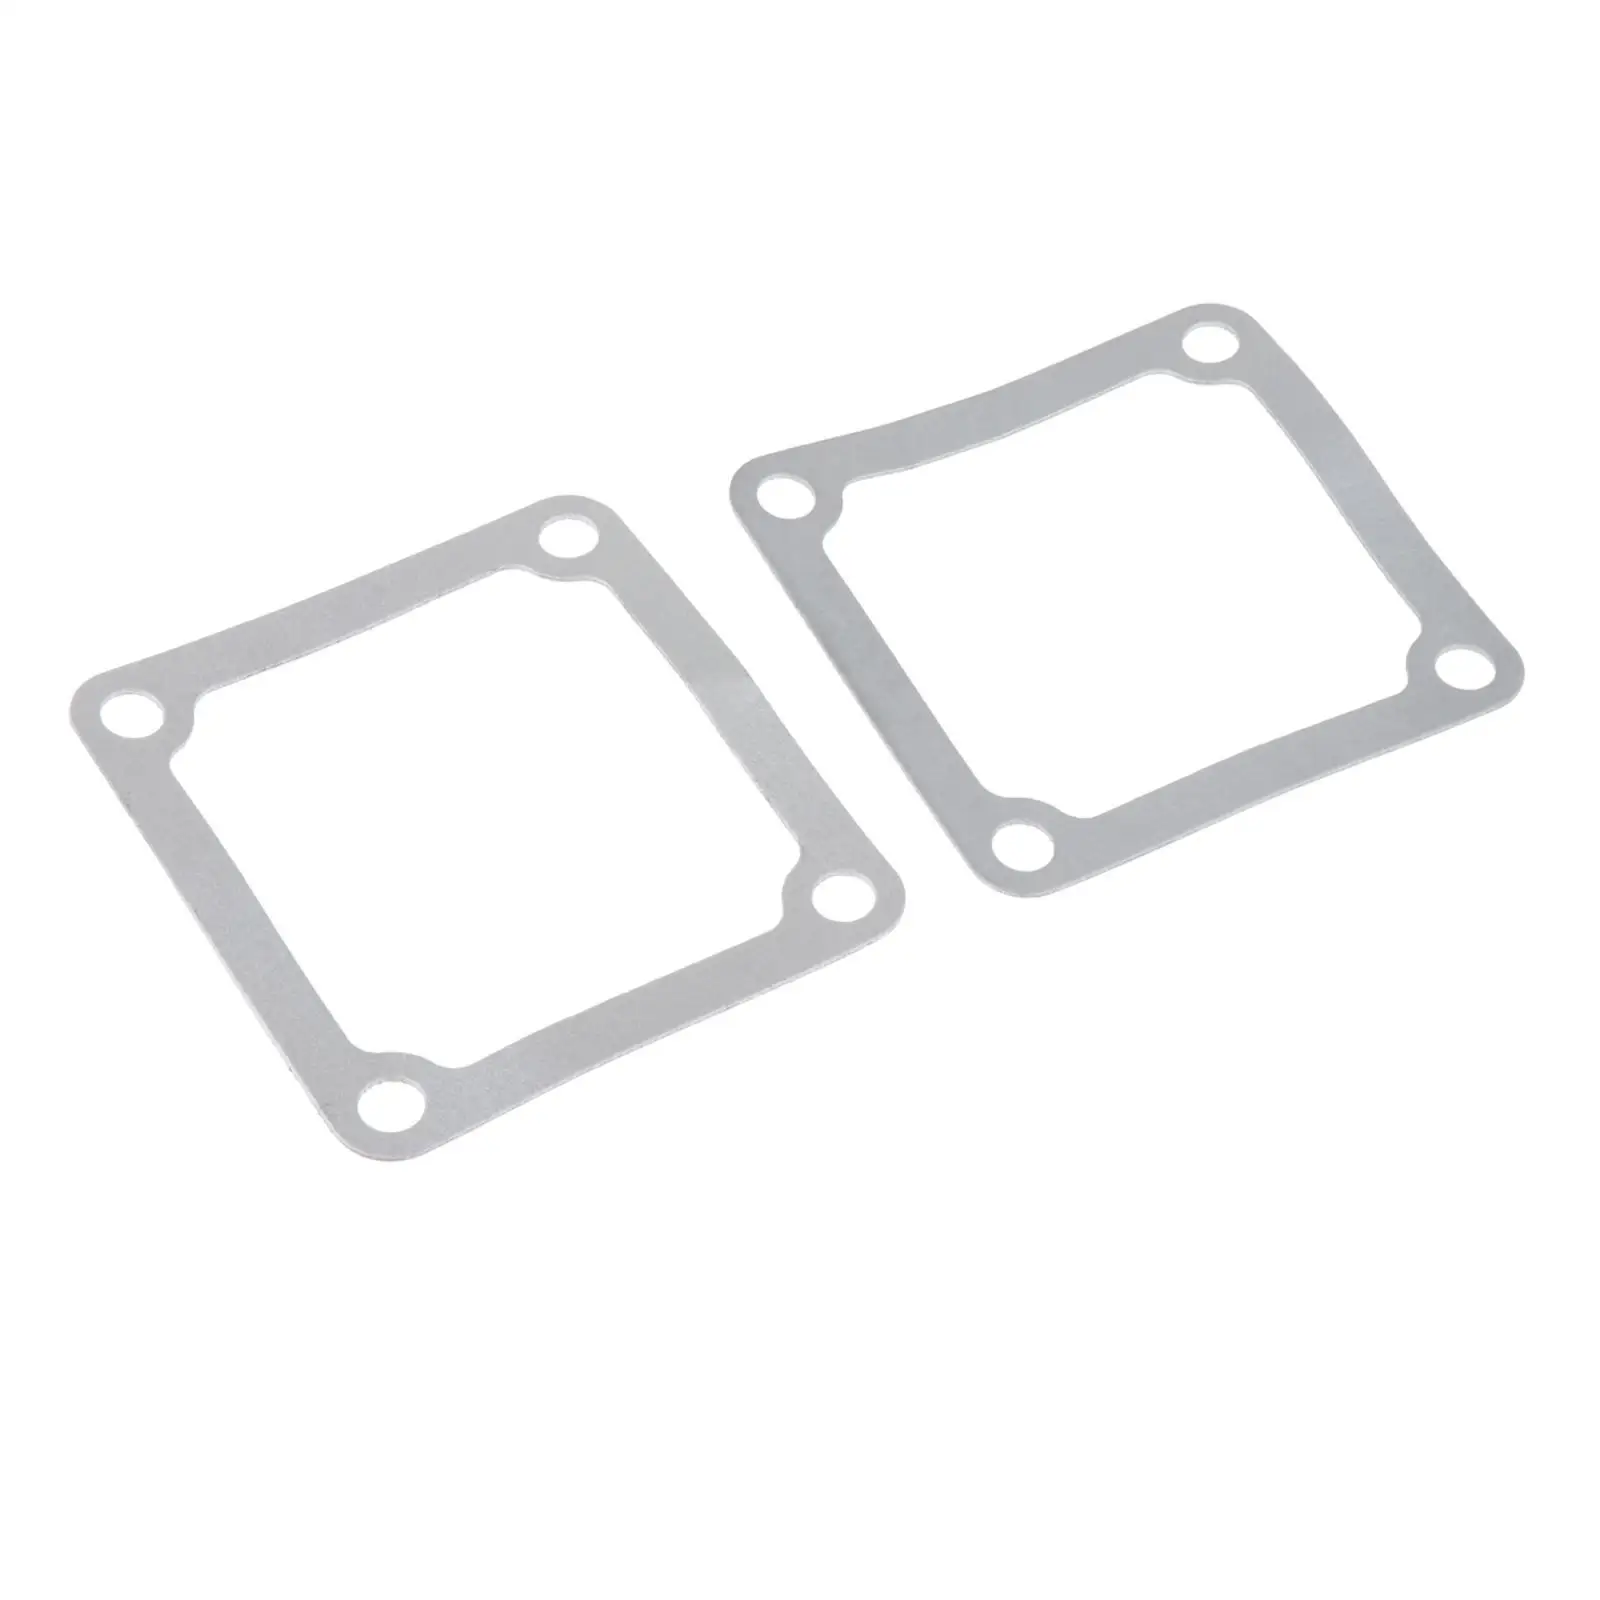 2x Intake Heater Grid Gaskets Auto Parts Durable Power 93x98mm Professional for